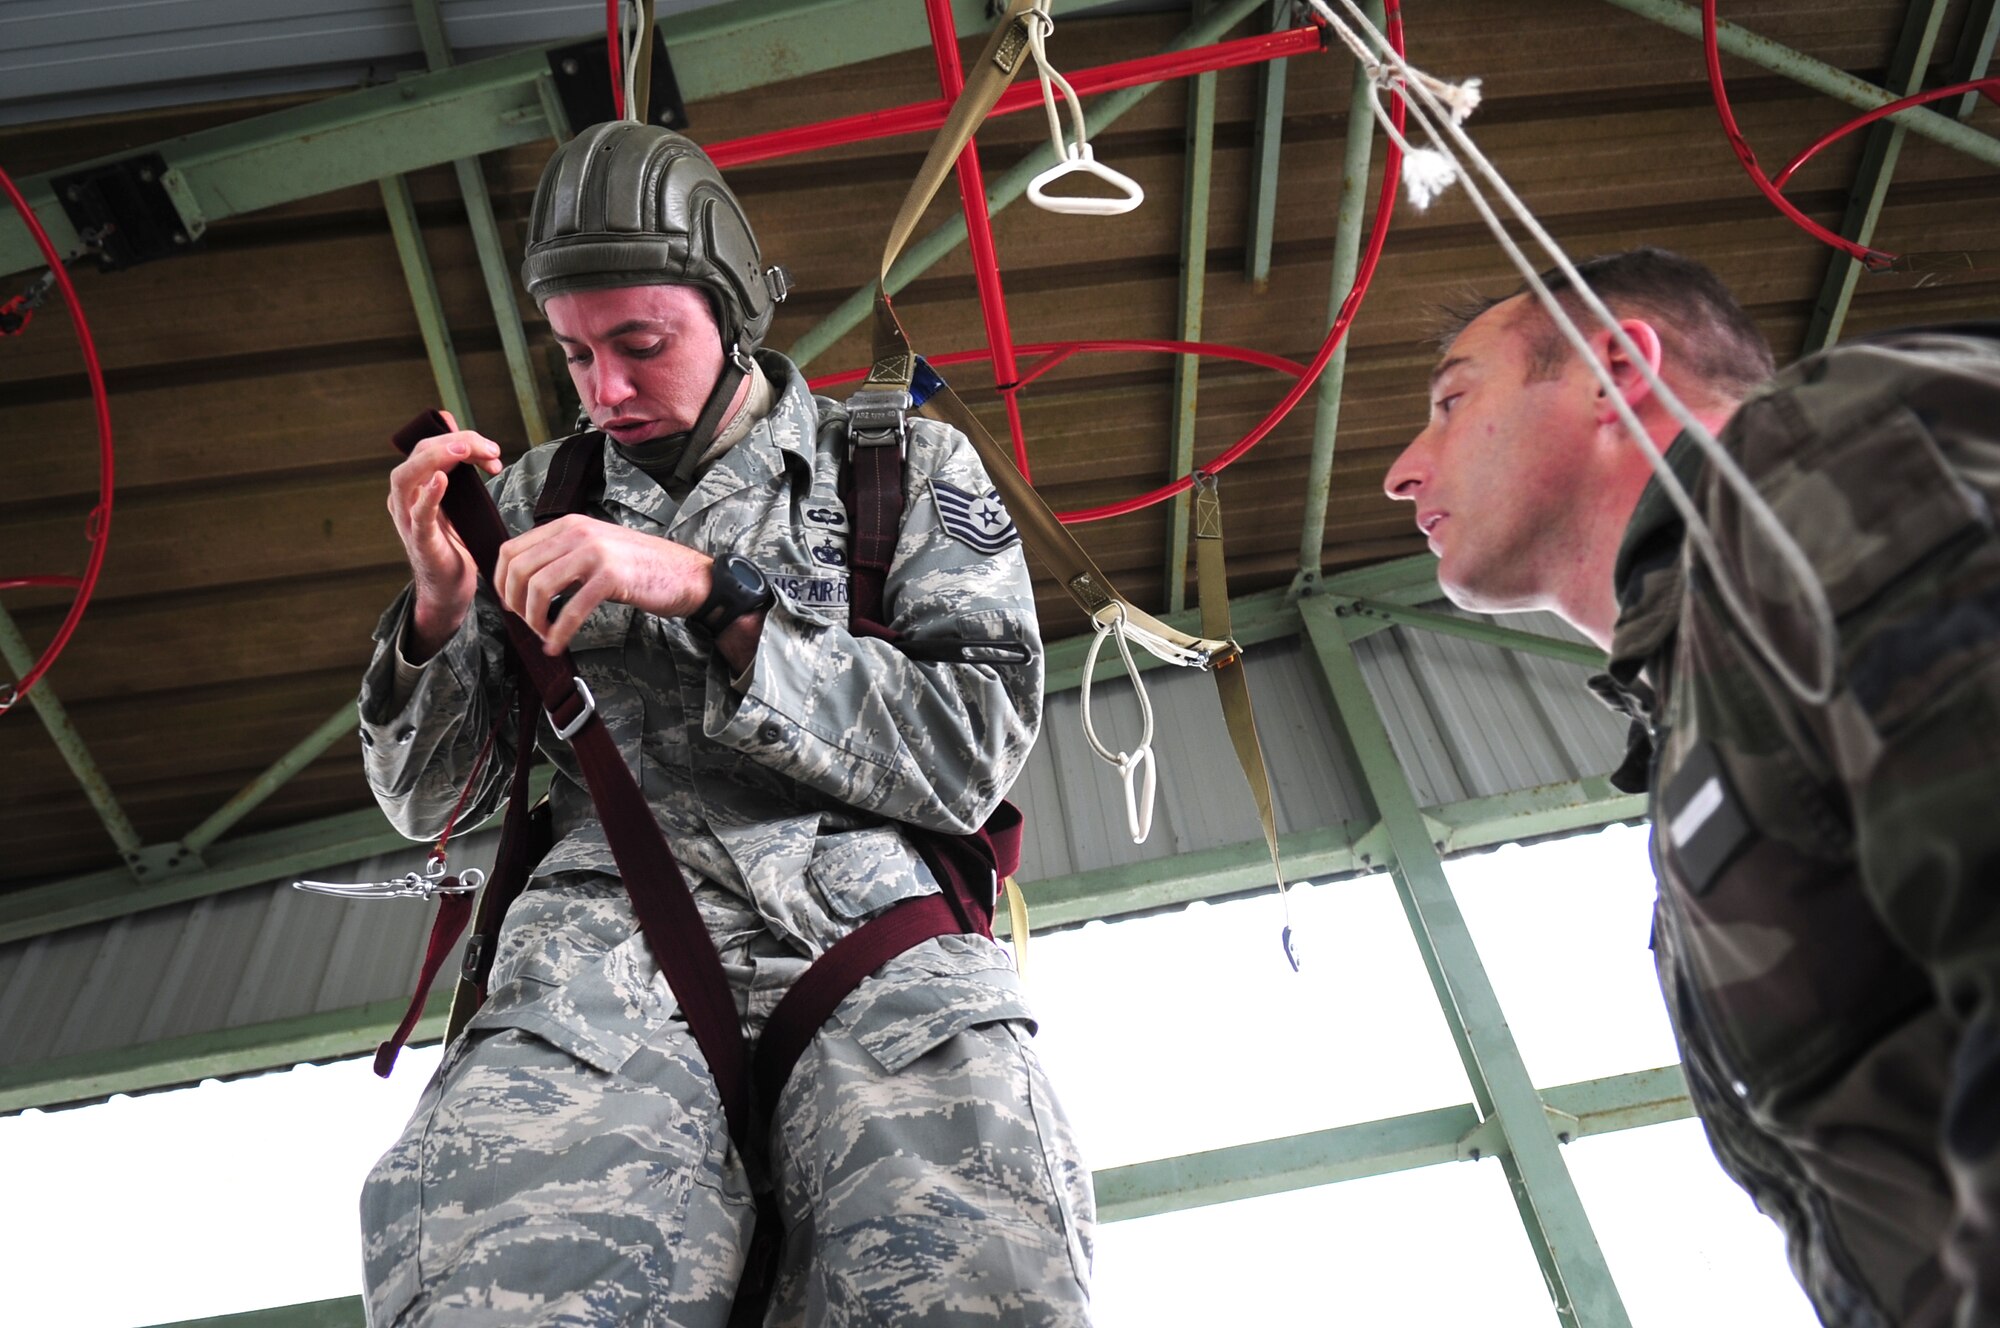 French Airborne Academy instructor Master Sgt. Stephane Paternotte, instructs U.S. Air Force Tech. Sgt. Jason Shaffer on proper body position while using a French parachute, durring training before a combined nation jump, March 3, 2010. Members of the 435th Contingency Response Group and the 5th Quartermaster Company joined with their French military counterparts for a week of training at the École des troupes aéroportées (ETAP), or School of Airborne Troops, a military school dedicated to training the military paratroopers   of the French army, located in the town of Pau, in the département of Pyrénées-Atlantiques, France.  The ETAP is responsible for training paratroopers, and for international cooperation and promotion of paratroop culture. (U.S. Air Force Photo by Staff Sgt. Jocelyn Rich)